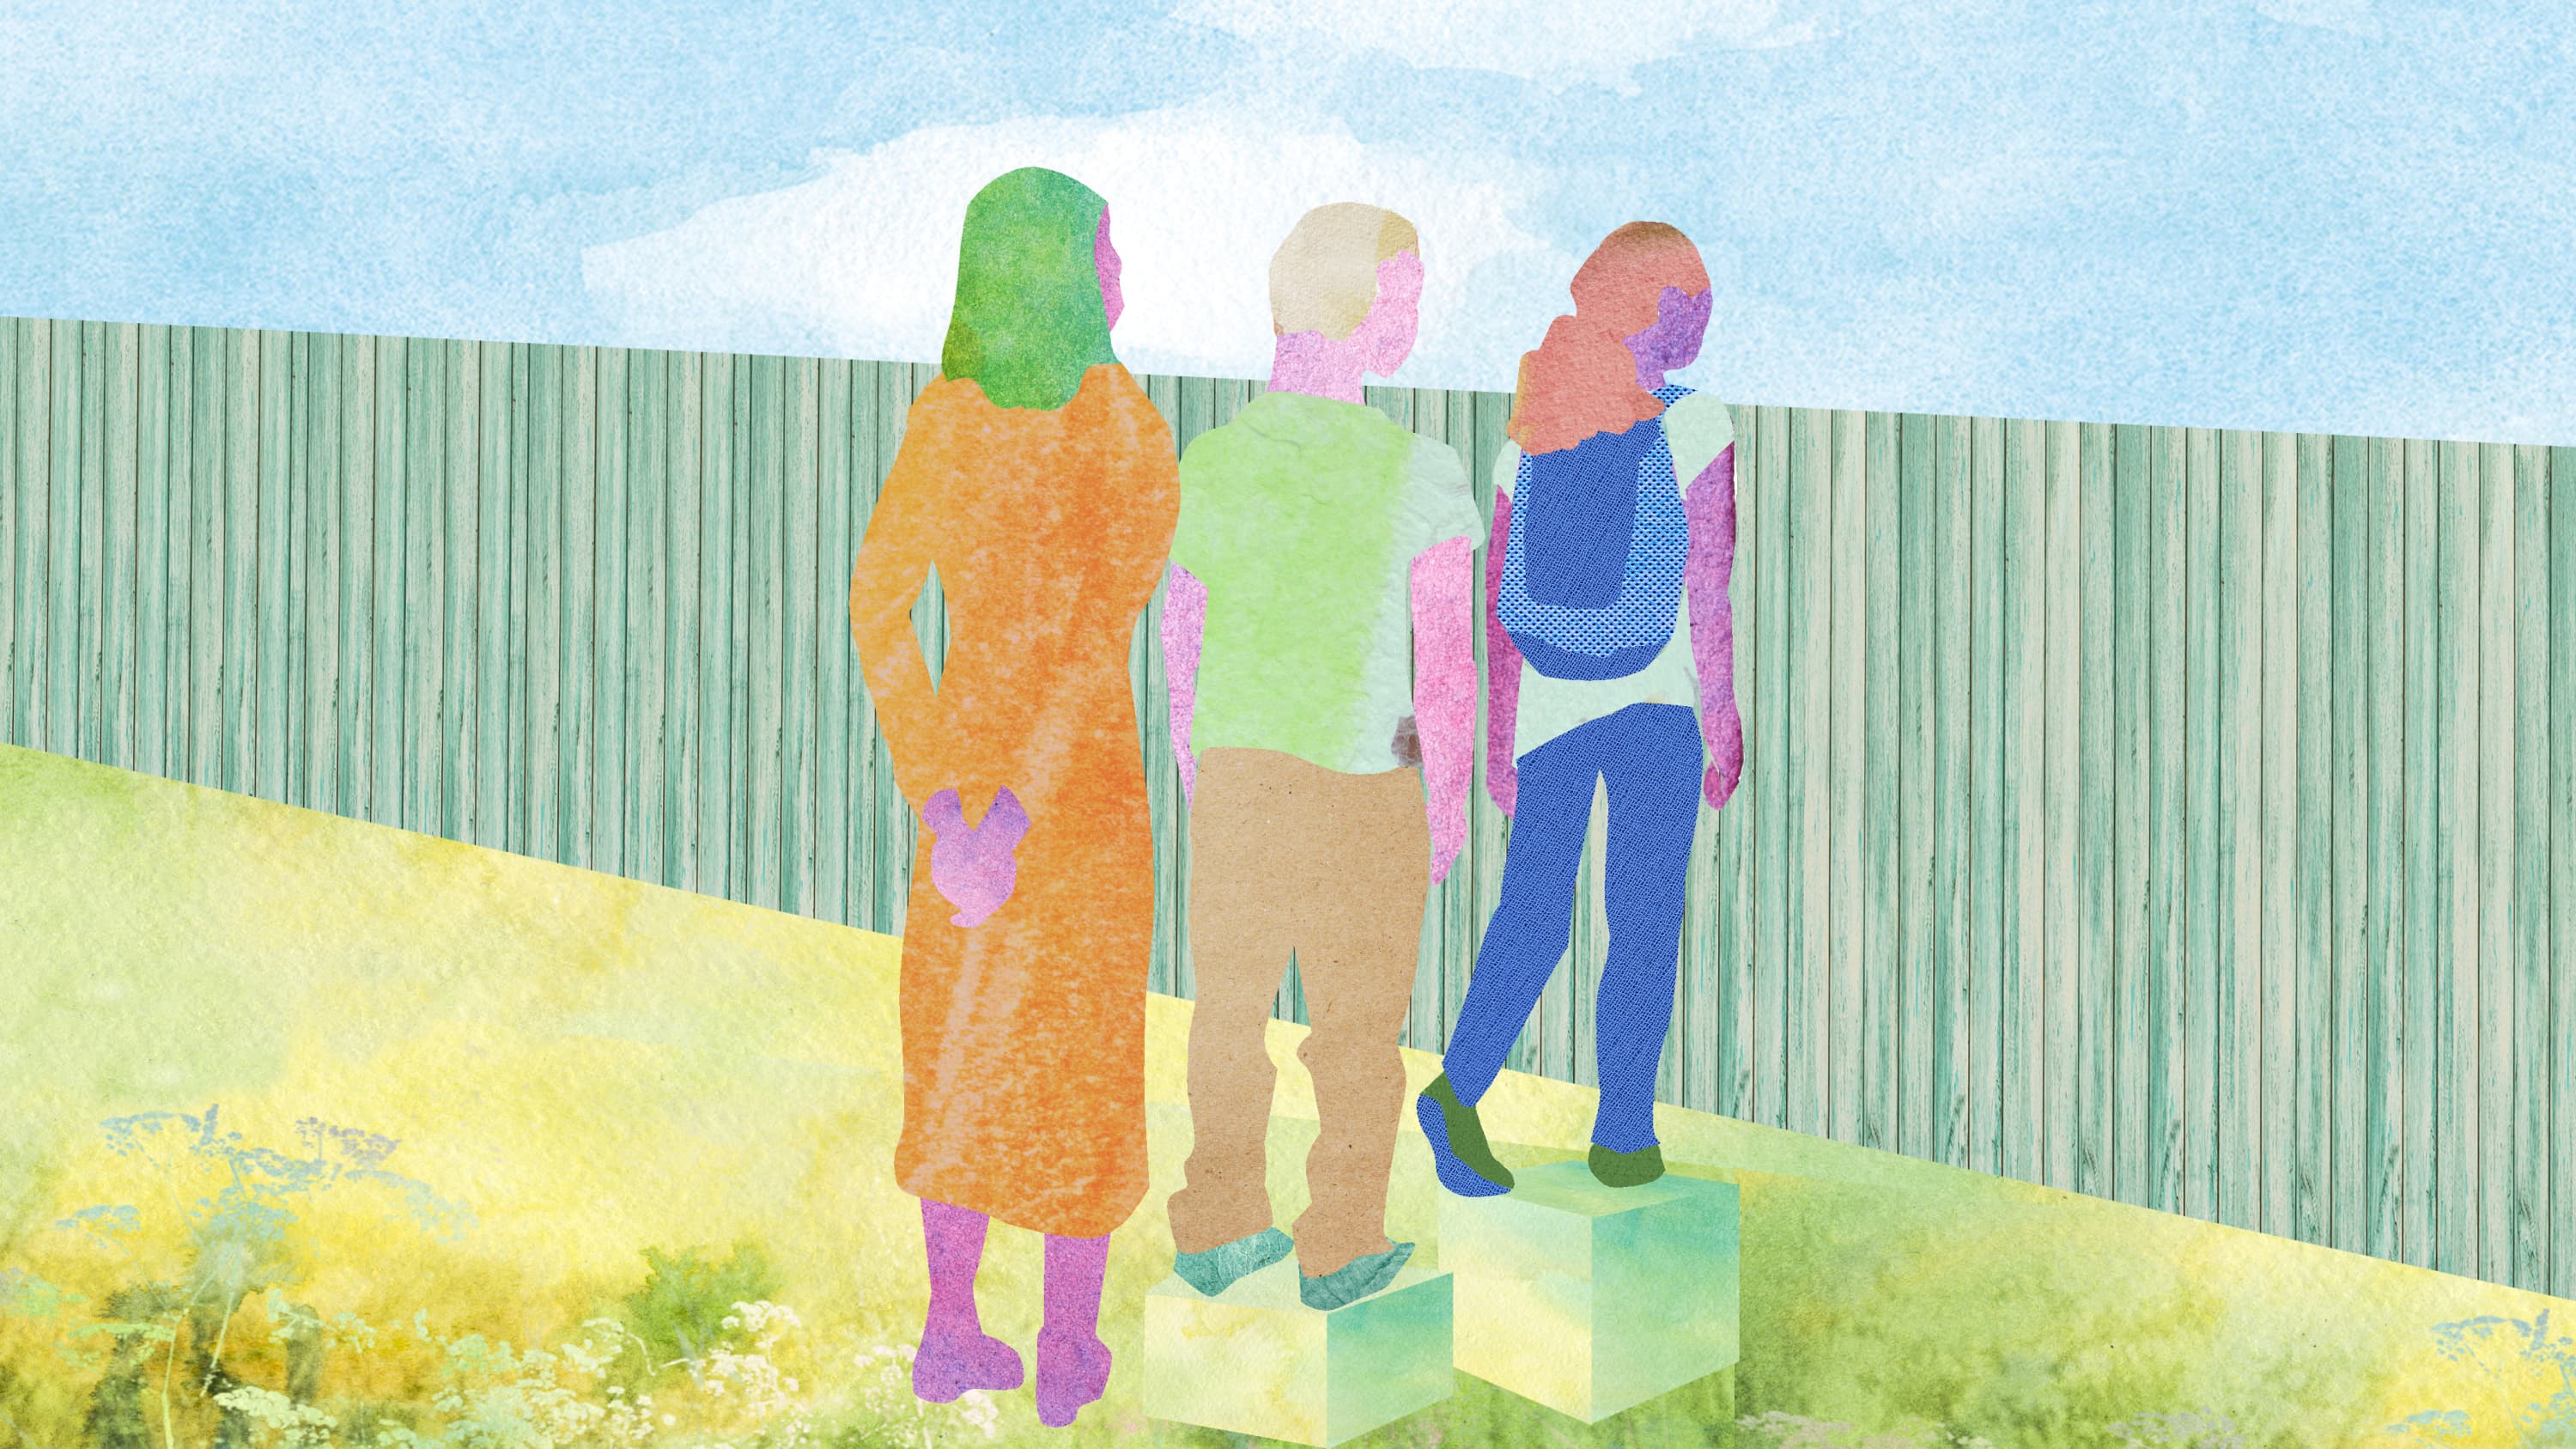 Illustration showing three people looking over a fence, representing health equity